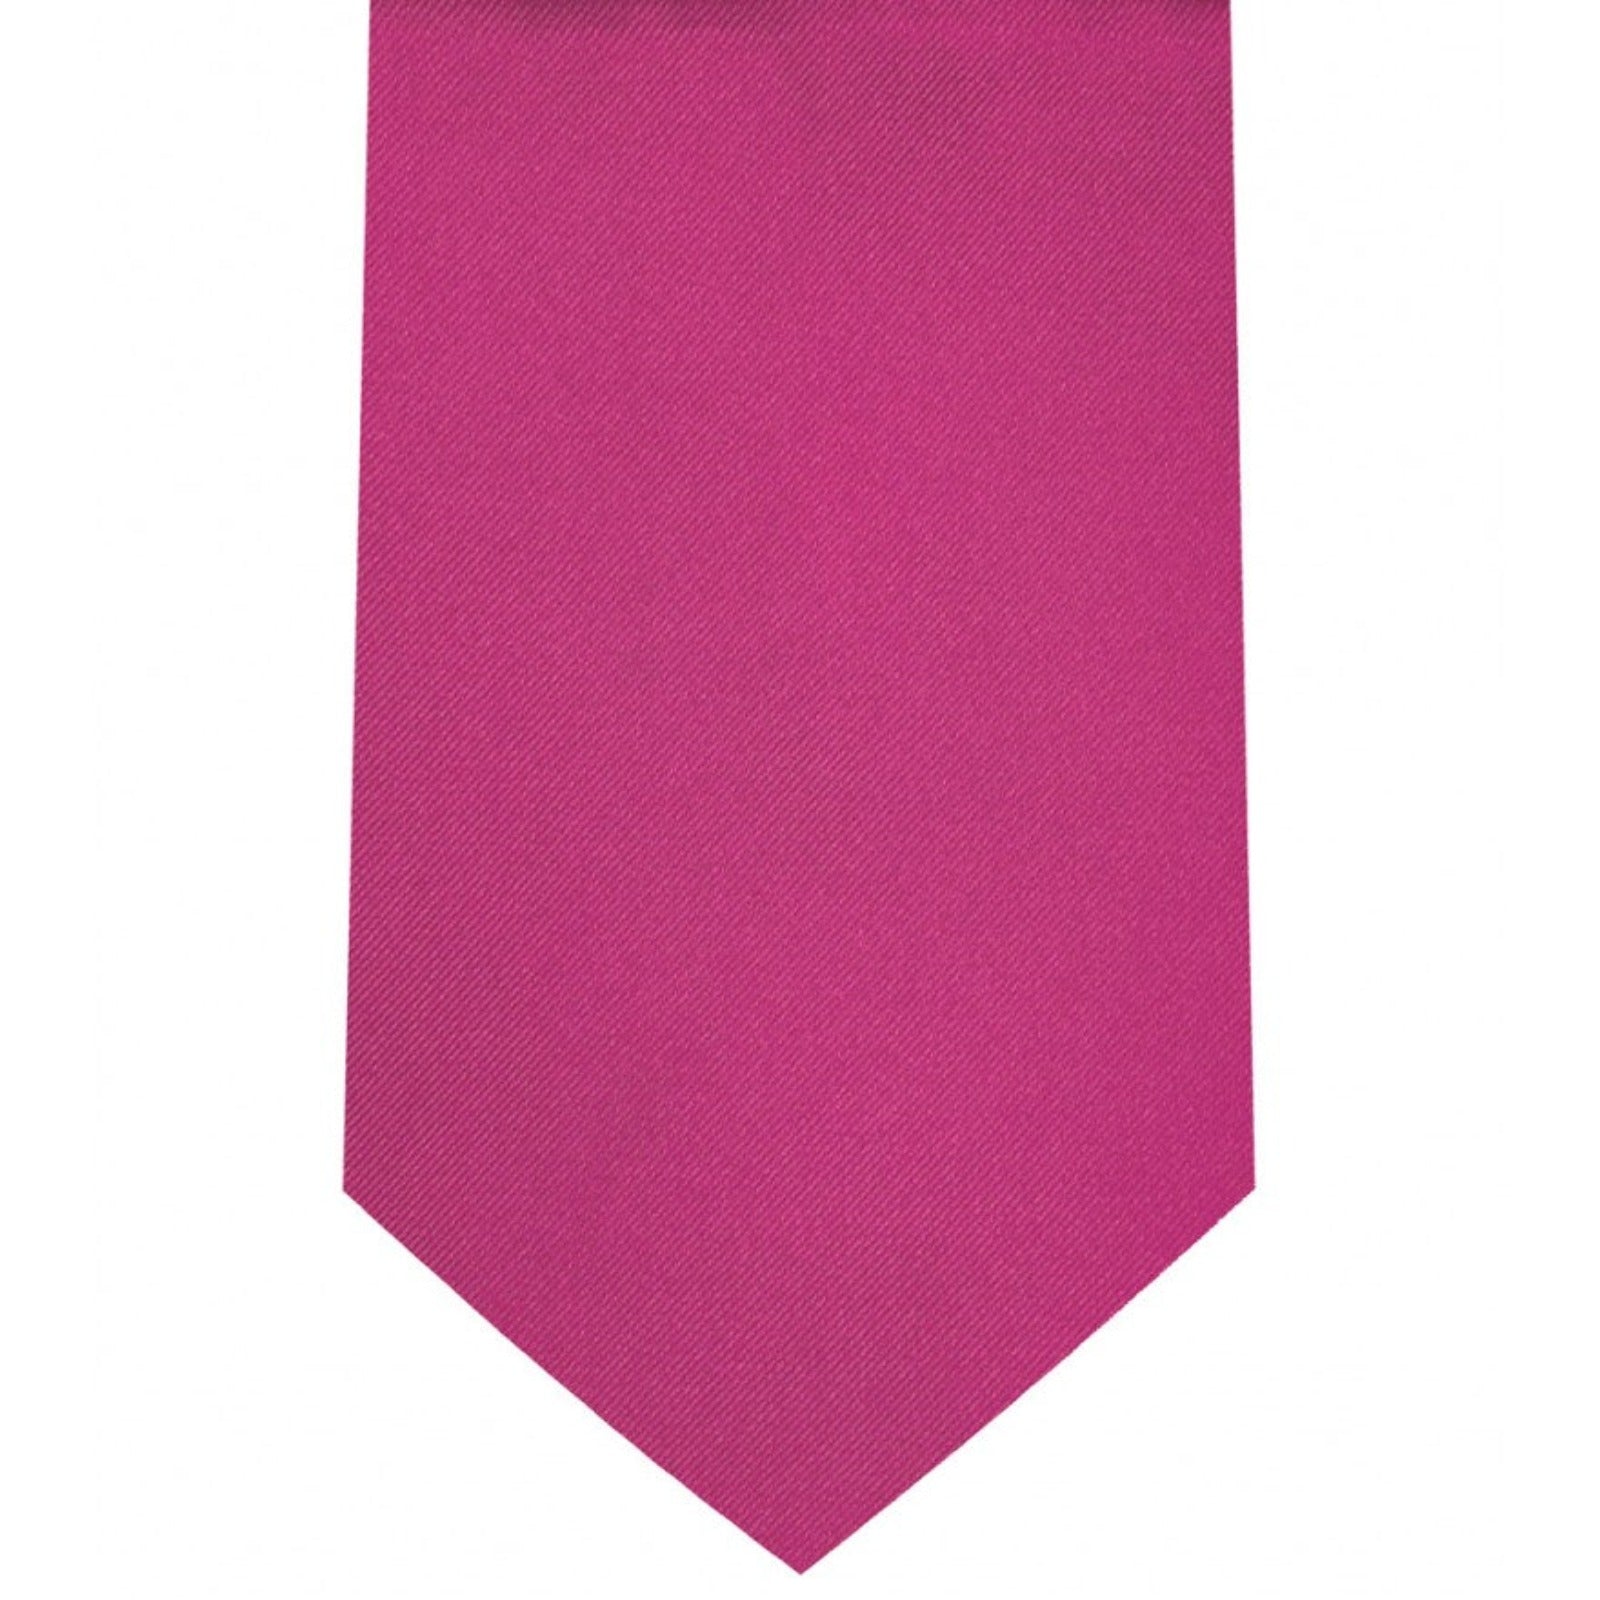 Classic Fuchsia Tie Regular width 3.5 inches With Matching Pocket Square | KCT Menswear 